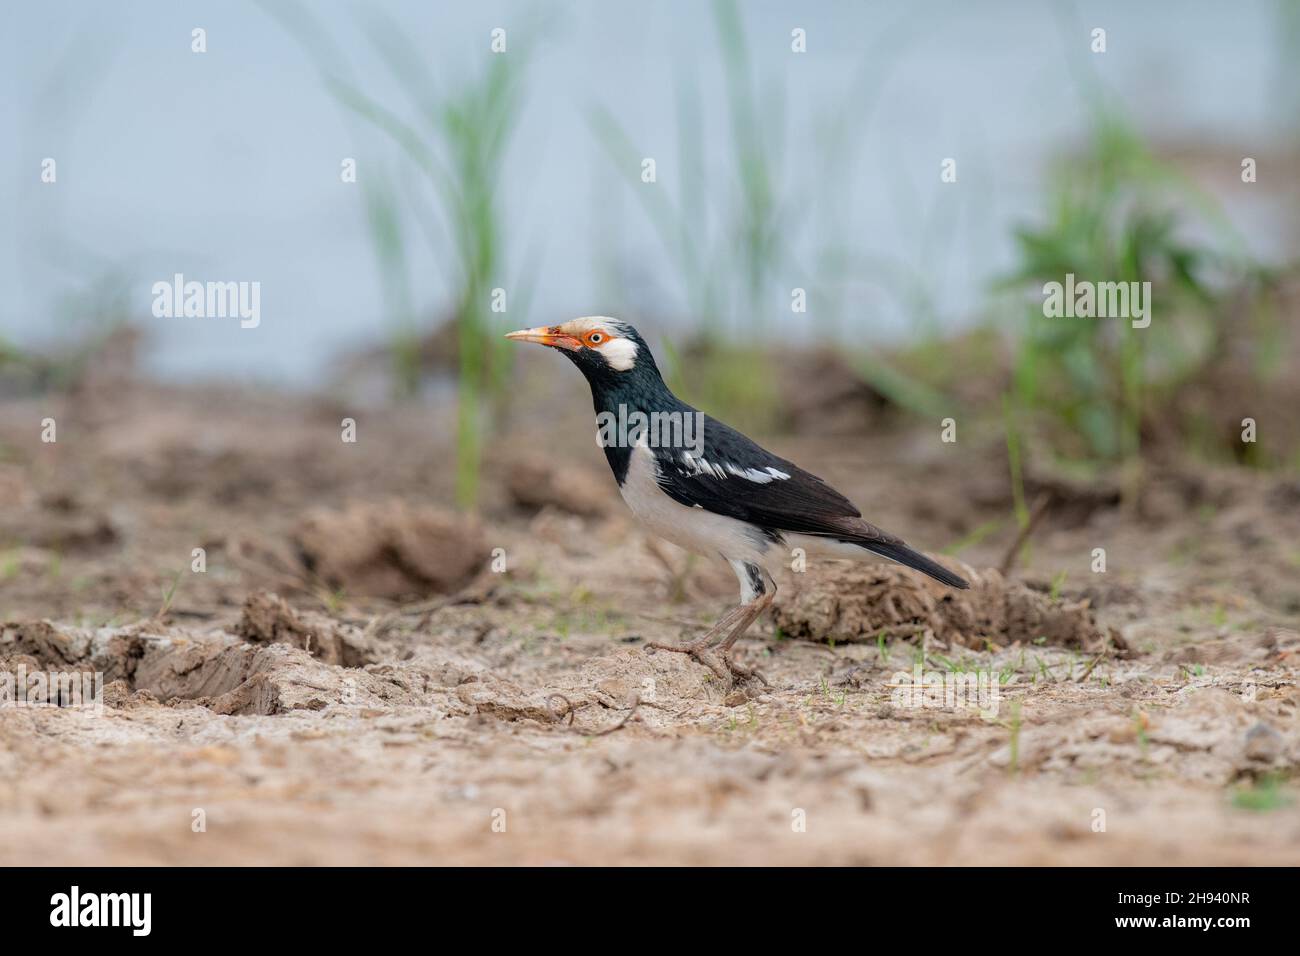 The pied myna or Asian pied starling (Gracupica contra) is a species of starling found in the Indian subcontinent and Southeast Asia. They are usually Stock Photo